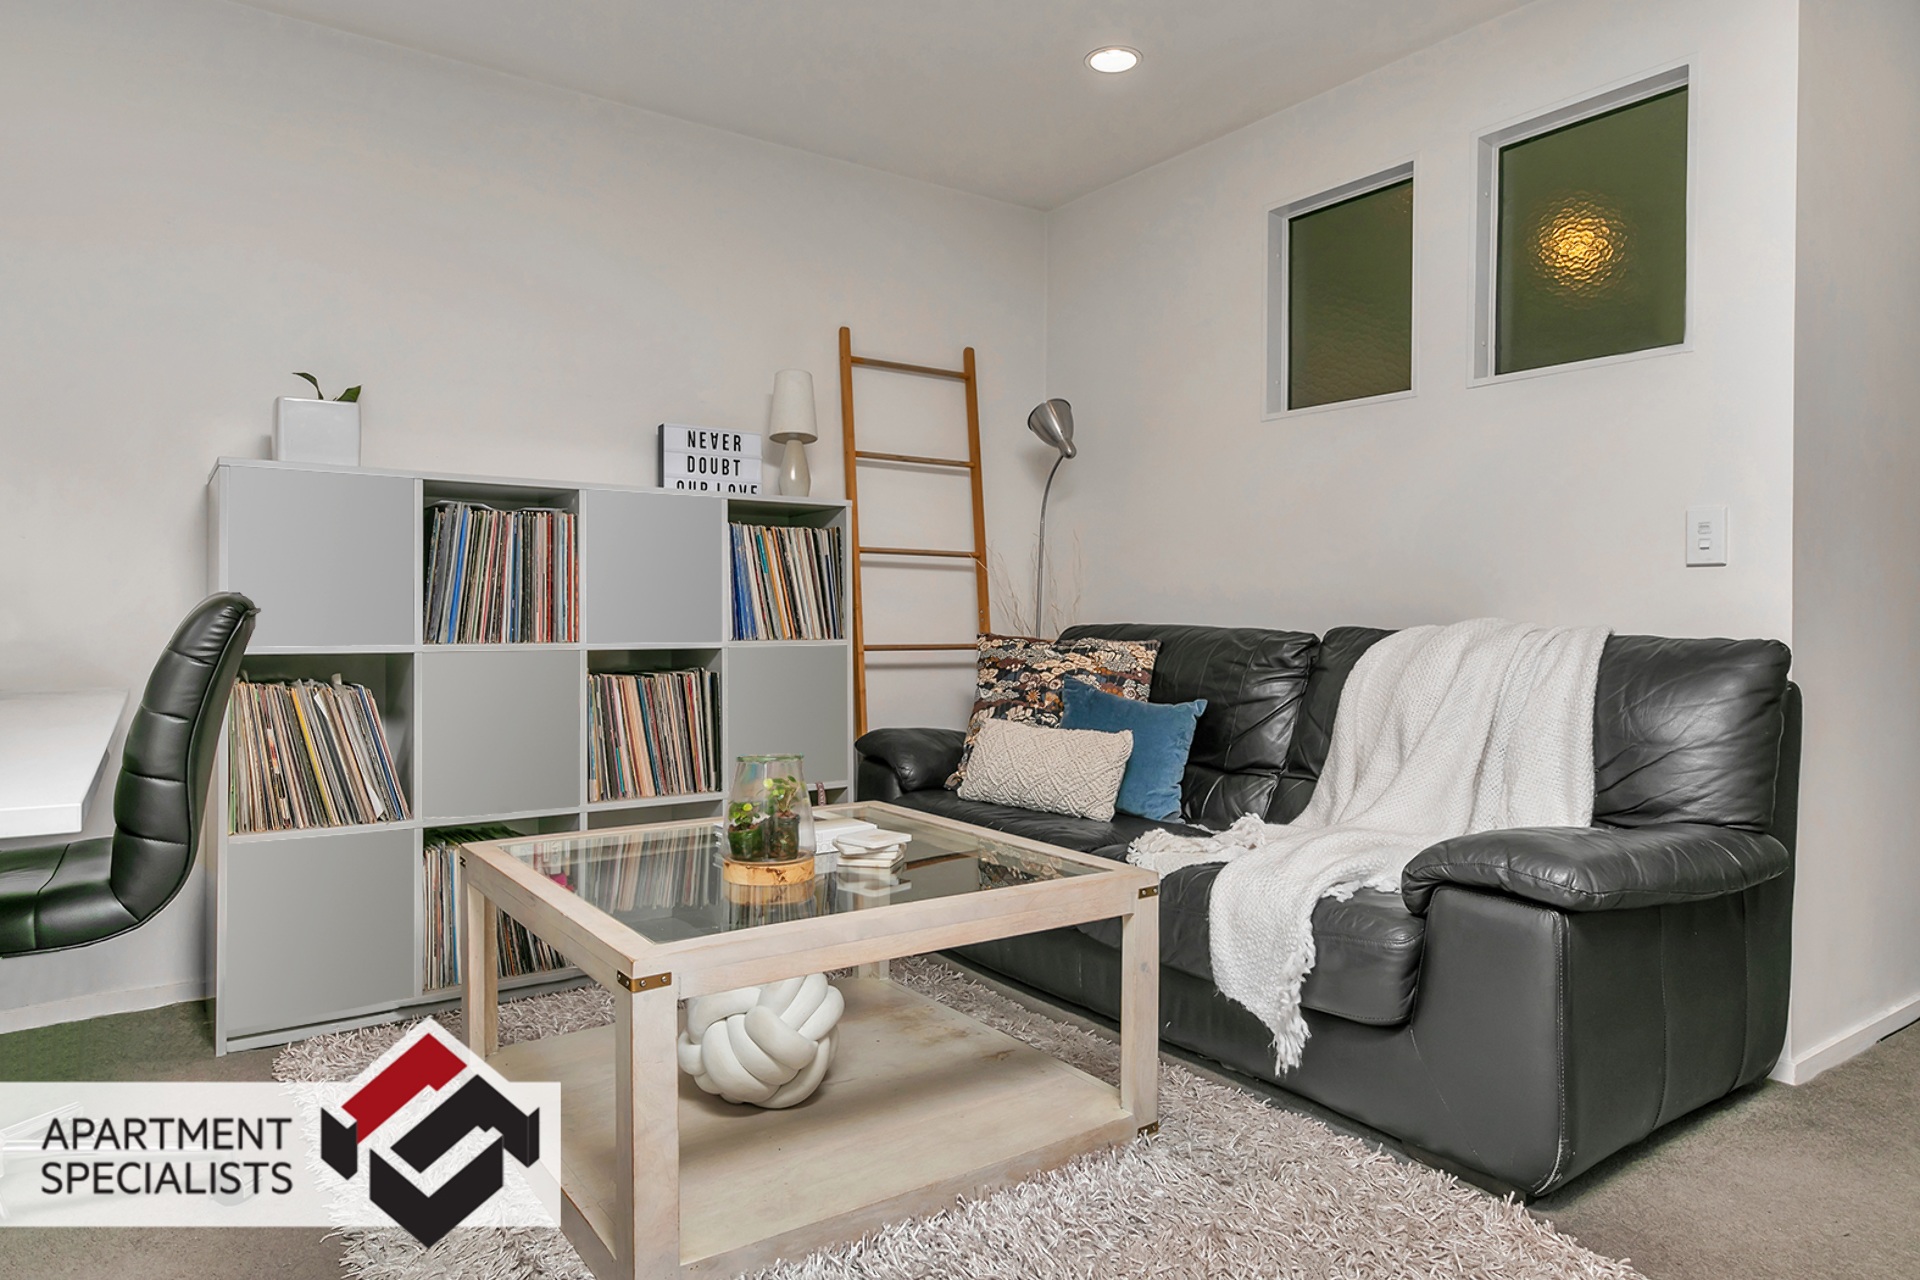 4 | 15 Blake Street, Ponsonby | Apartment Specialists